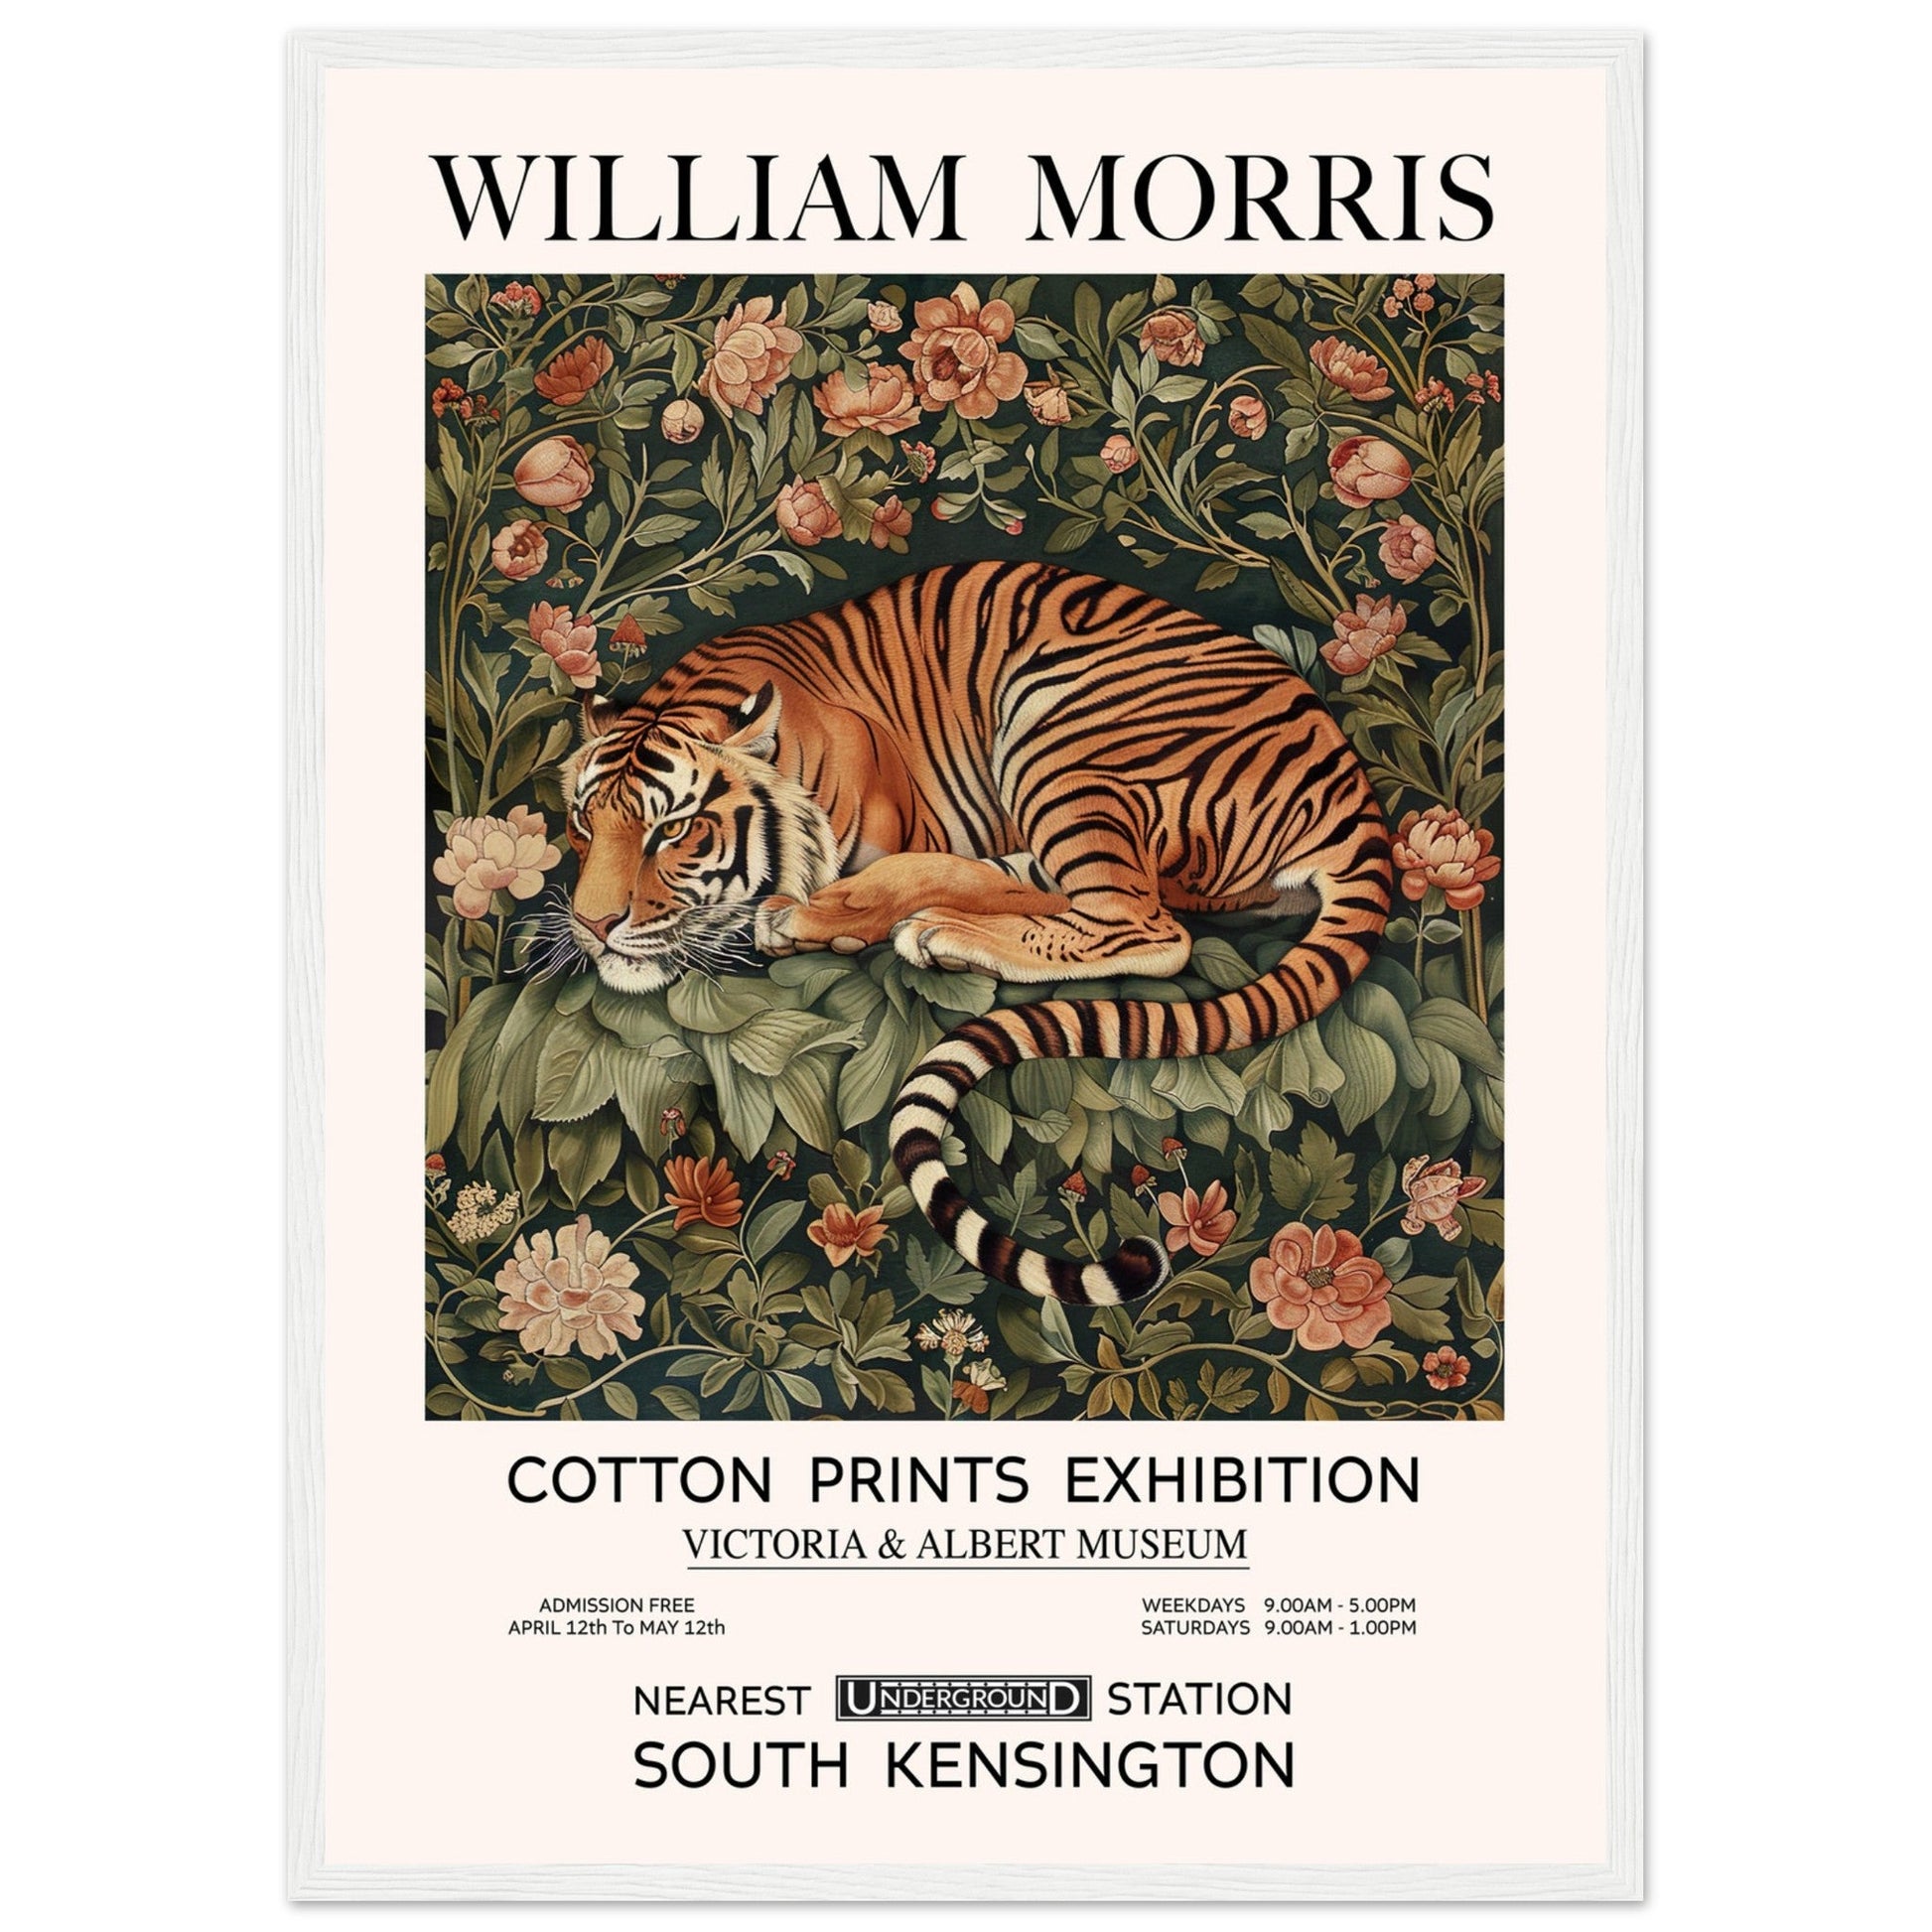 The Tiger In Flowers - Framed Poster, The Tiger In Flowers, Vintage Art print, william morris framed, #illieeart